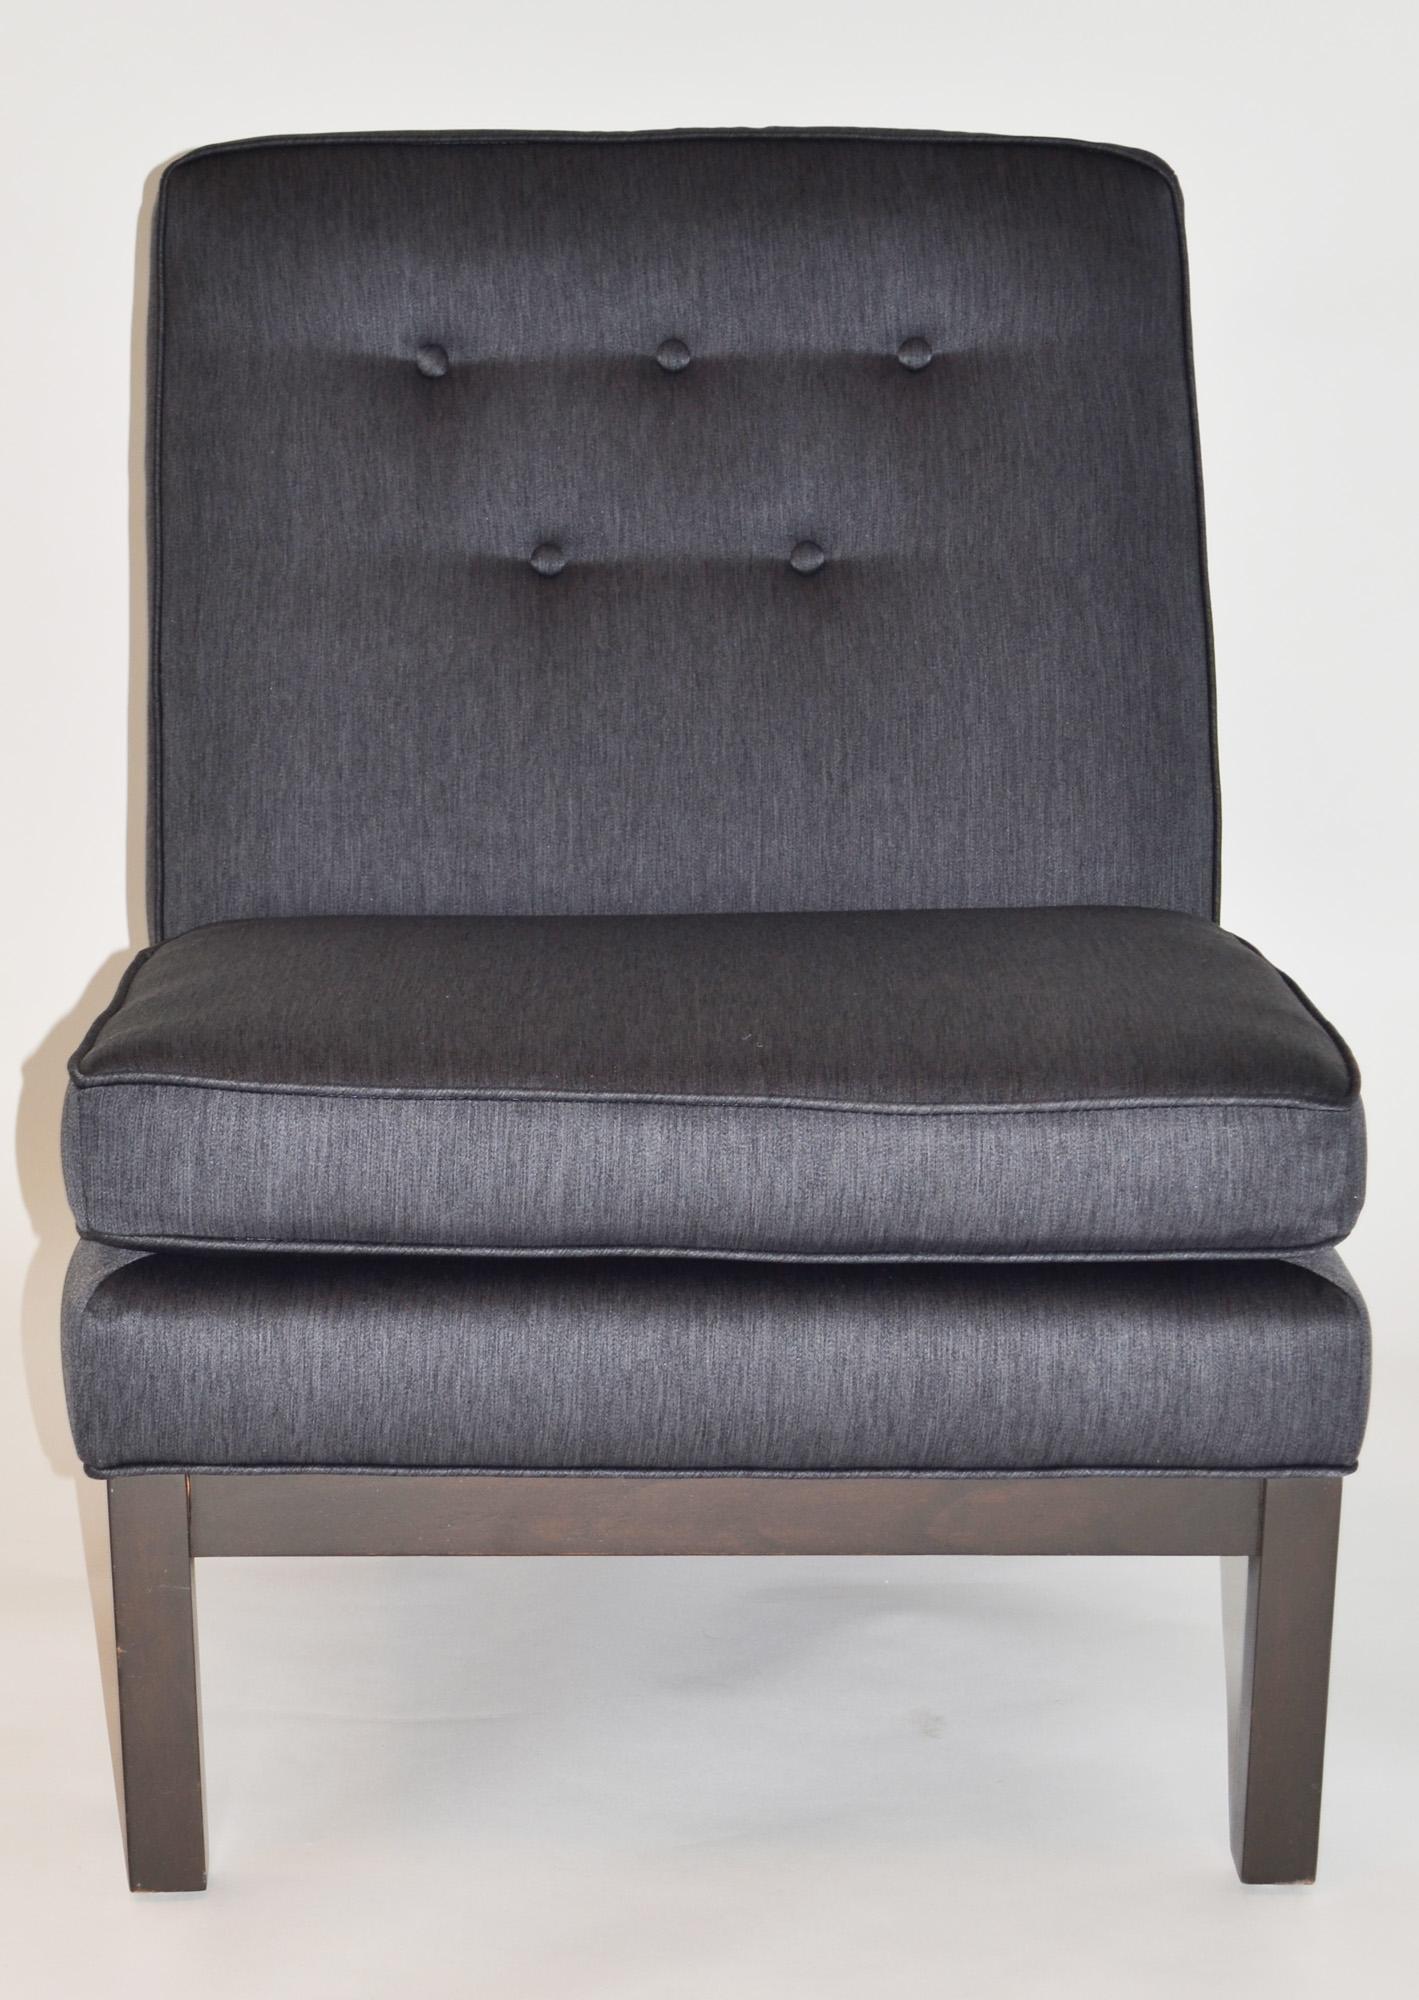 Pair of Slipper Lounge Chairs by Kipp Stewart for Directional 1960s 
Newly upholstered in slate gray / dark indigo cotton fabric with five-button back and attached cushions, with a professionally restored dark finish walnut base. Circa 1960s